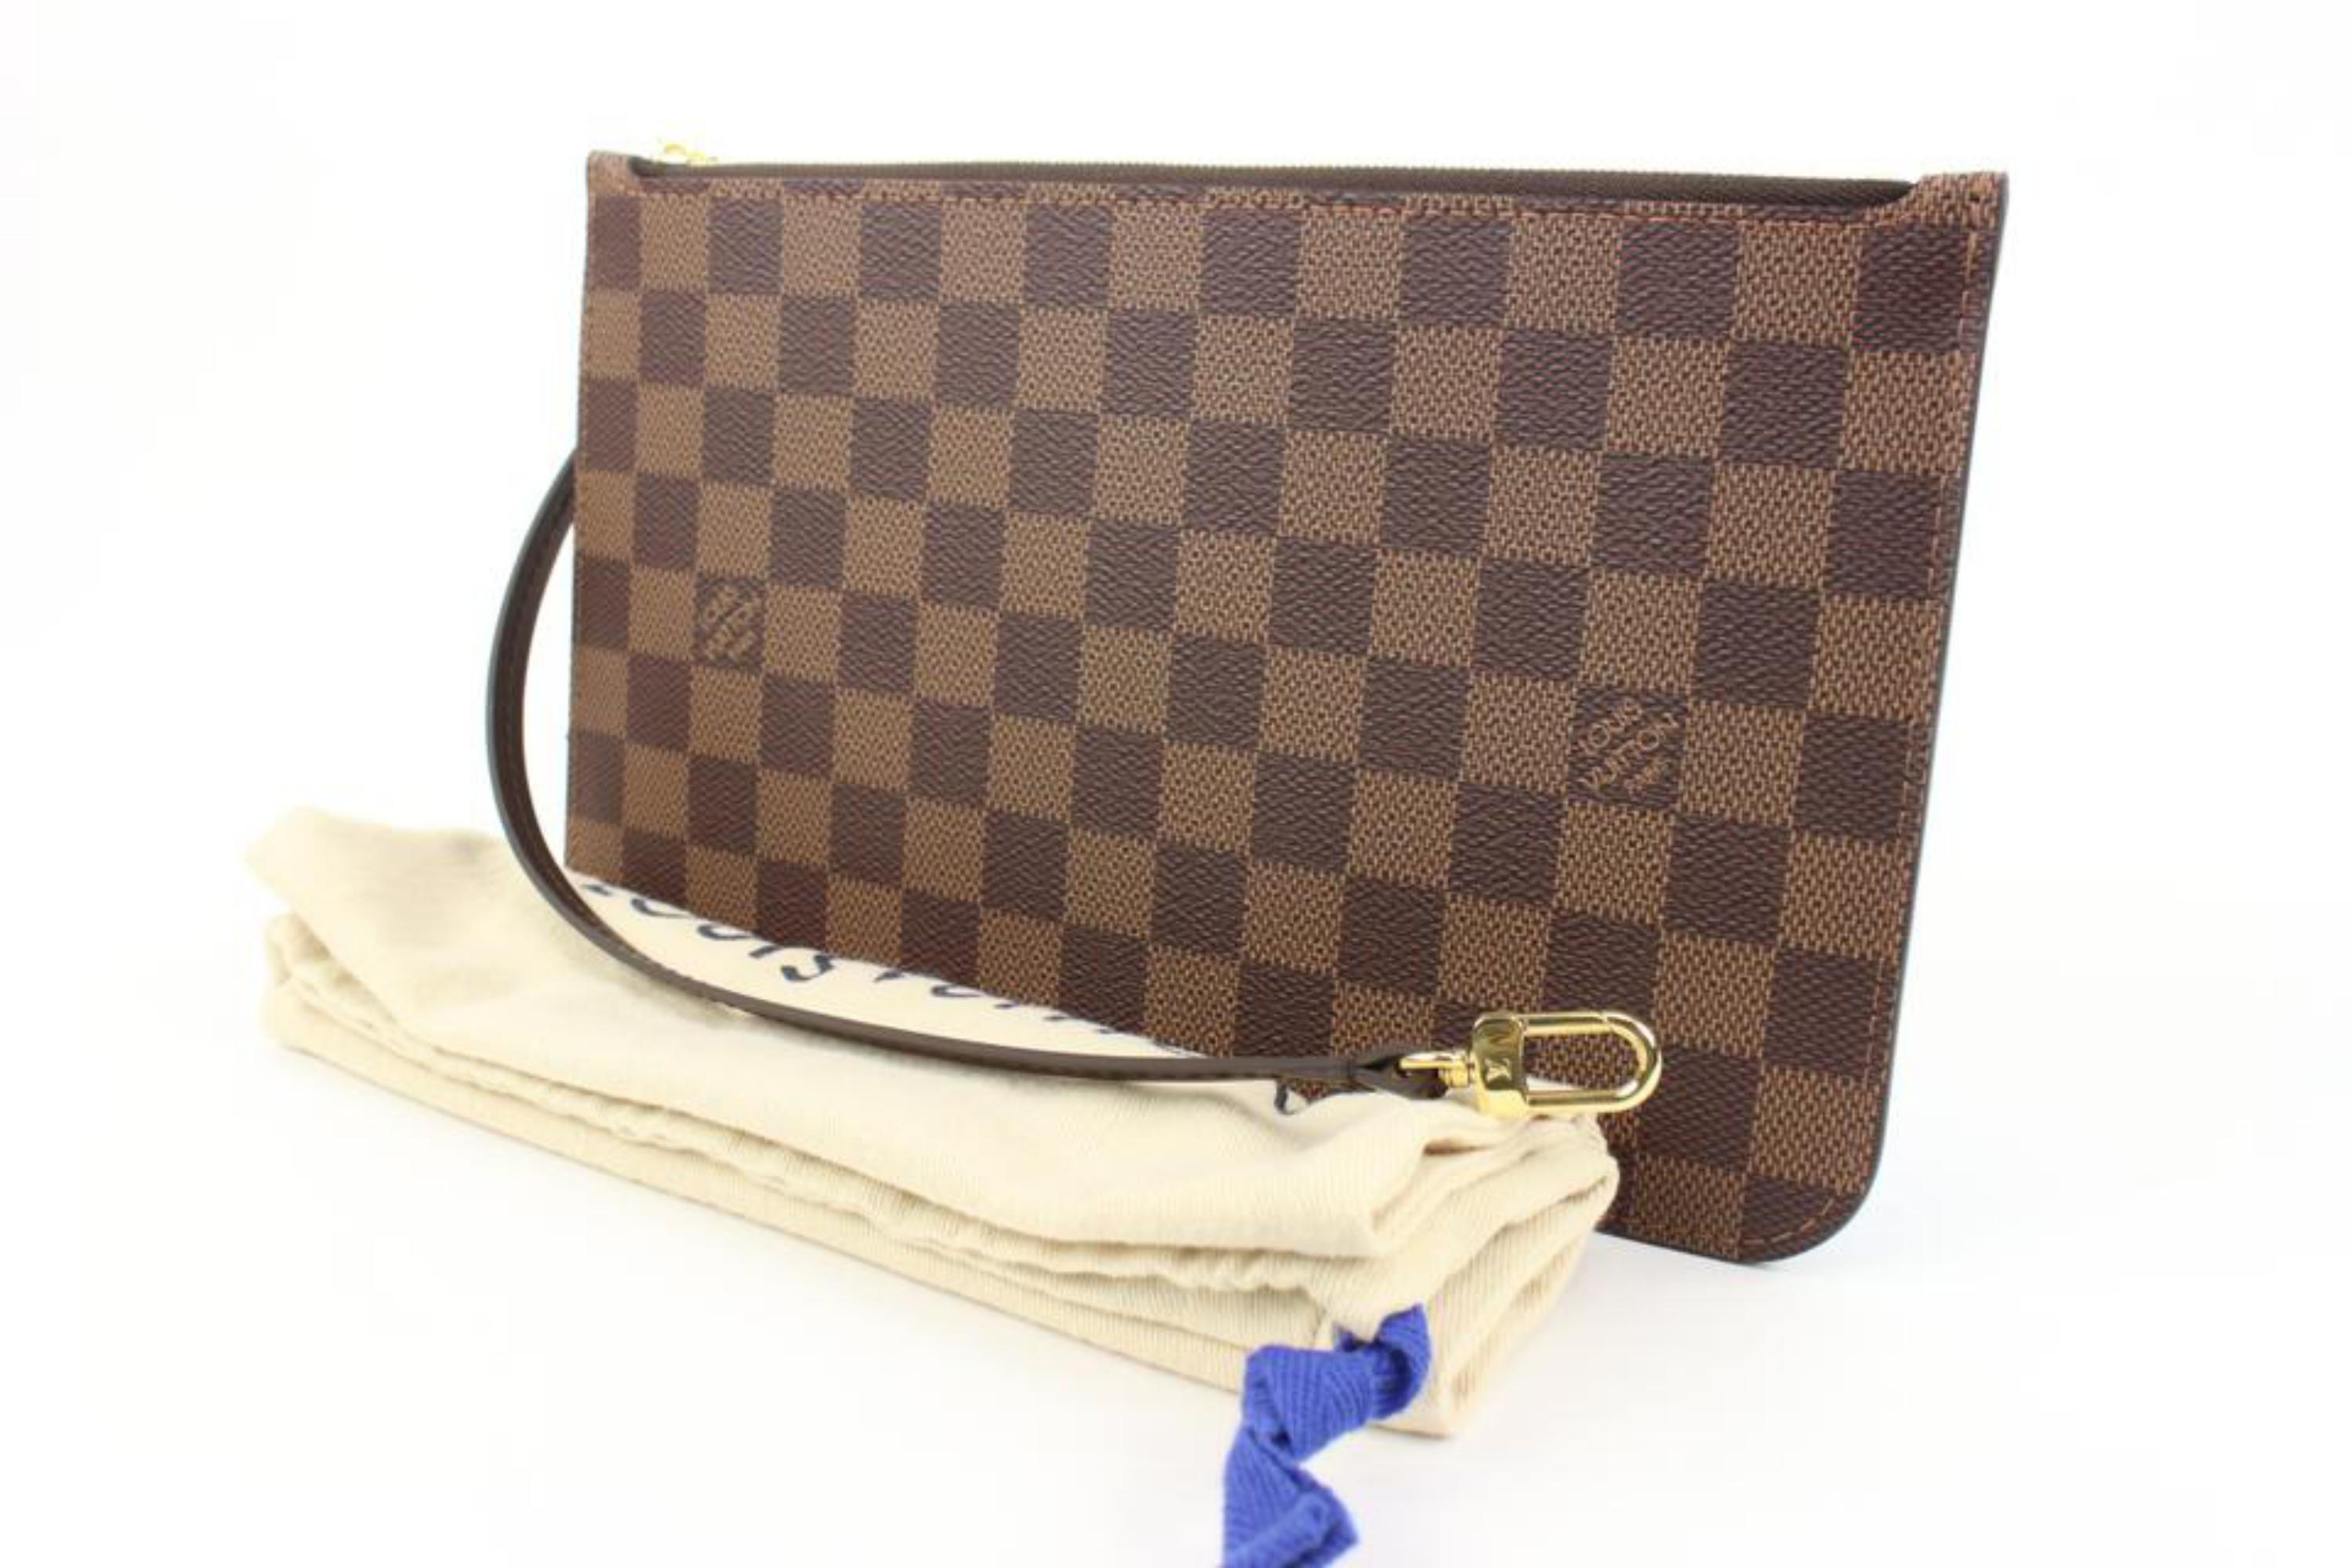 Louis Vuitton Damier Ebene Neverfull Pochette MM or GM Wristlet Pouch 27lv217s
Date Code/Serial Number: RFID Chip
Measurements: Length:  9.75